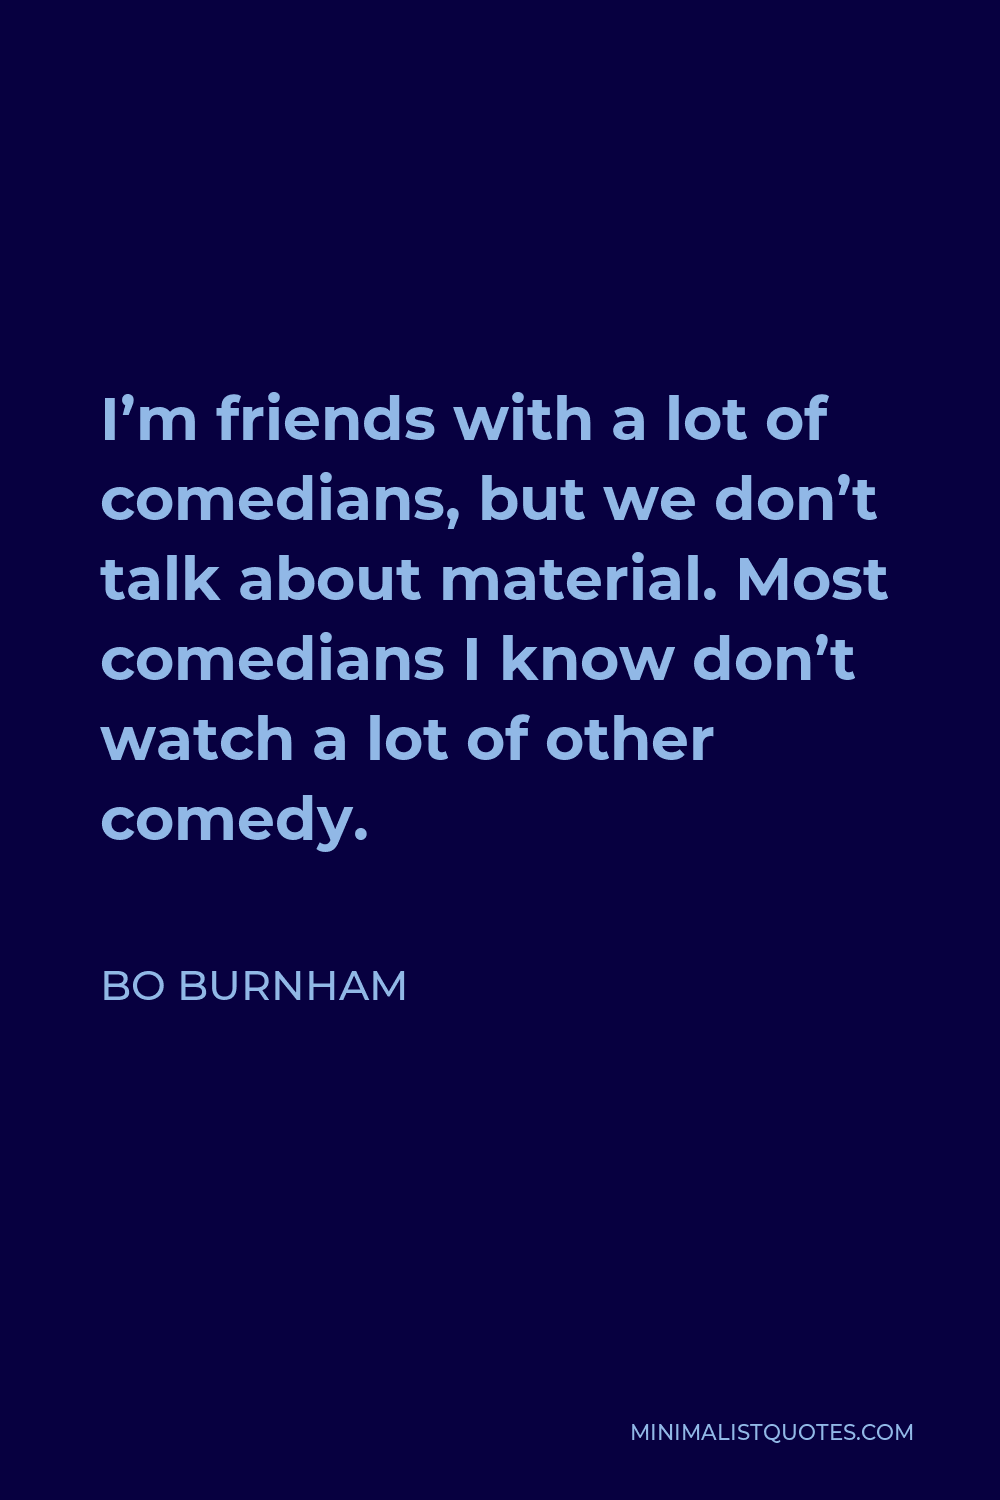 Bo Burnham Quote - I’m friends with a lot of comedians, but we don’t talk about material. Most comedians I know don’t watch a lot of other comedy.